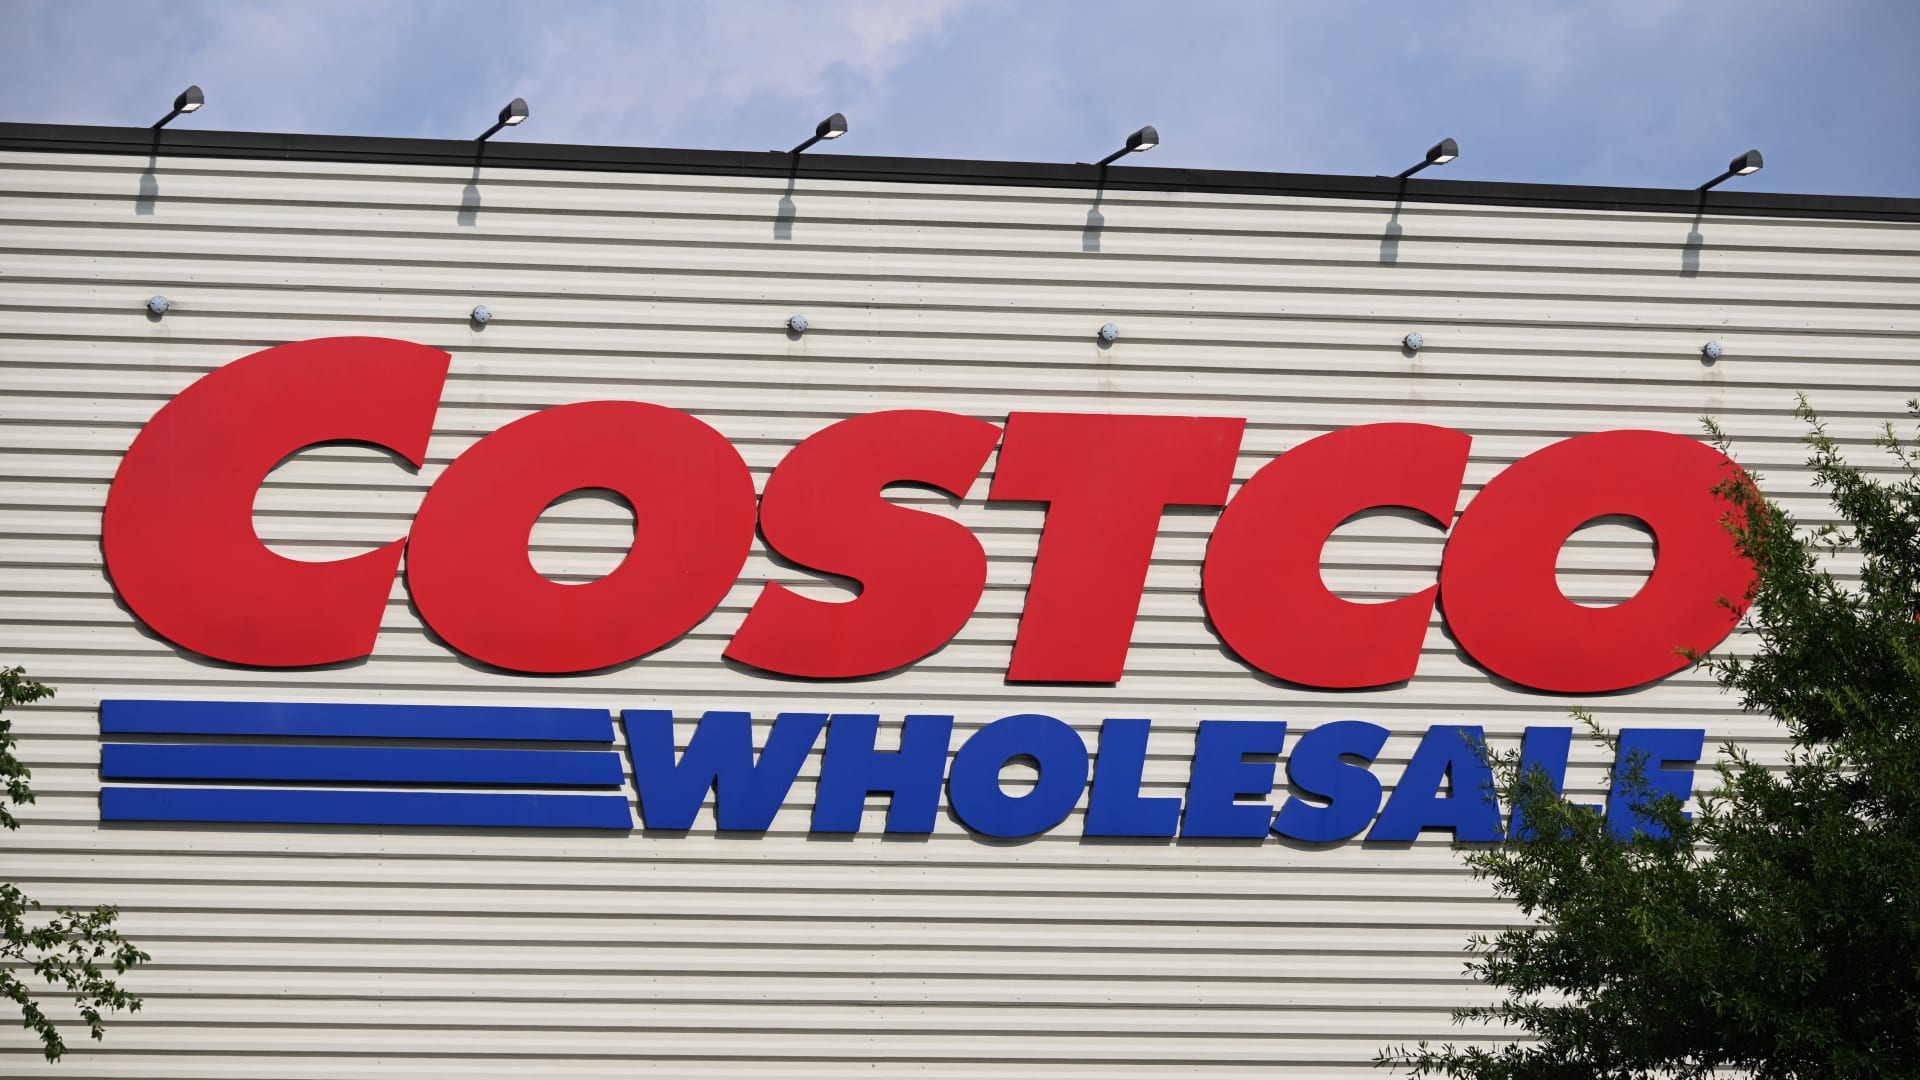 Costco Beats Earnings Estimates, Reports 5.7% Revenue Growth and Strong Same-Store Sales in Q2